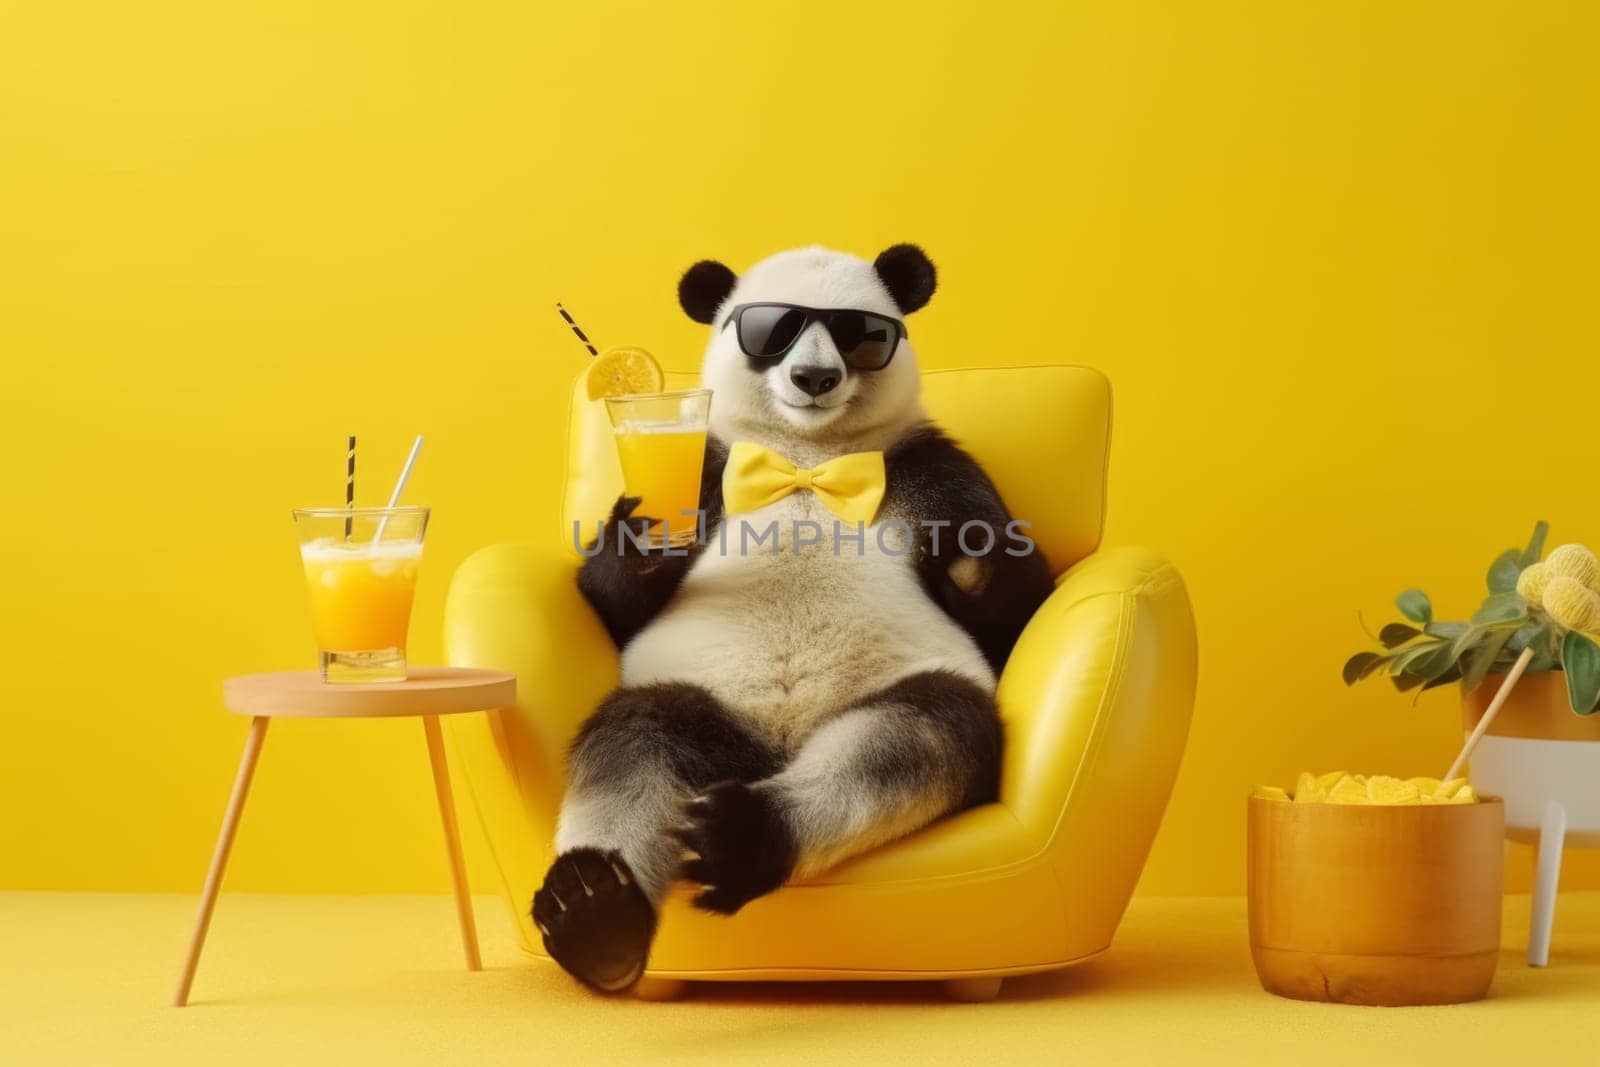 A laid-back panda in sunglasses and bowtie relaxing on a yellow chair with refreshing drinks, embodying leisure and summertime vibes